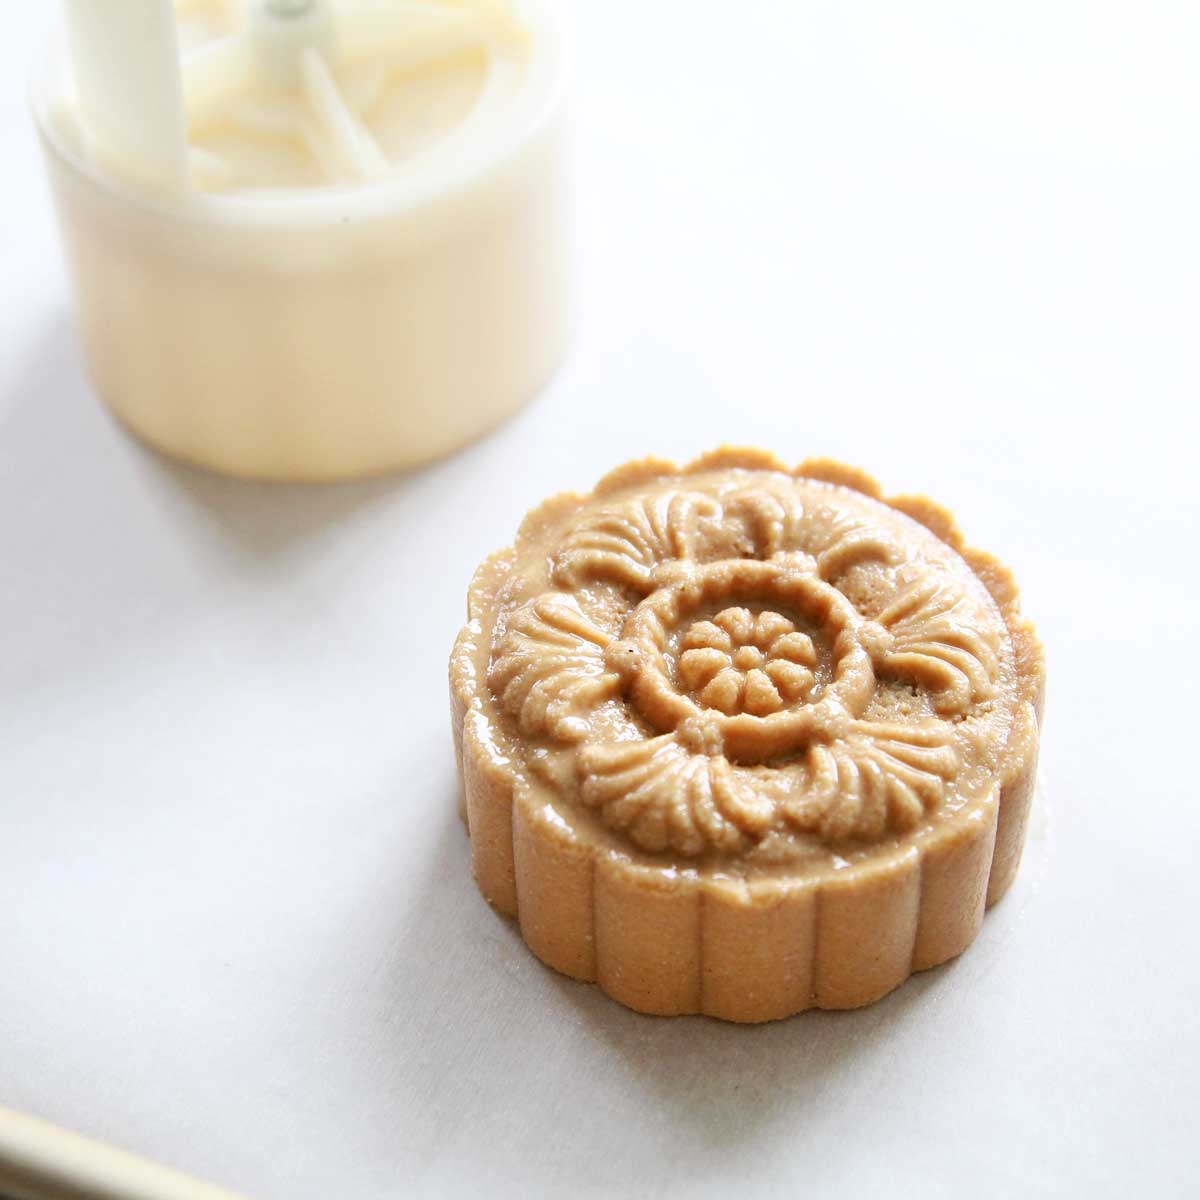 Vegan Peanut Butter Mooncakes with Chocolate Chip Cookie Dough Filling - vegan peanut butter mooncakes